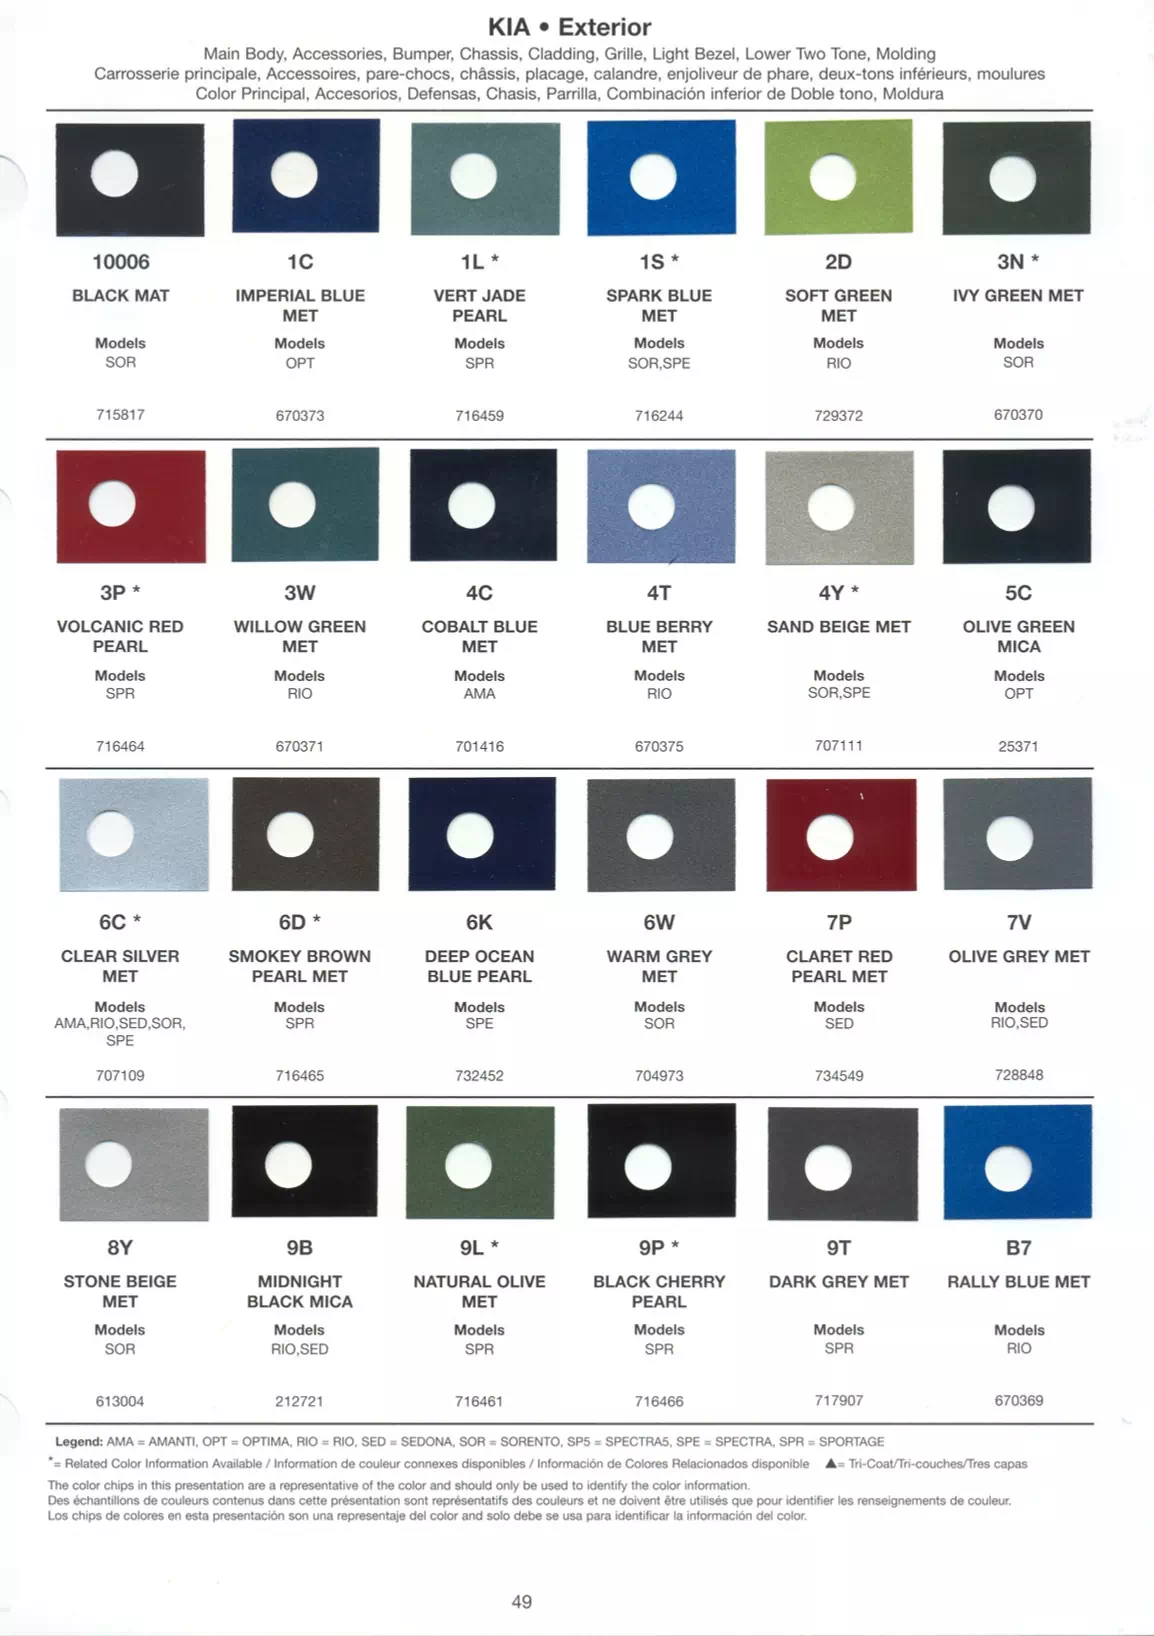 Color Swatches for 2005 kia vehicles